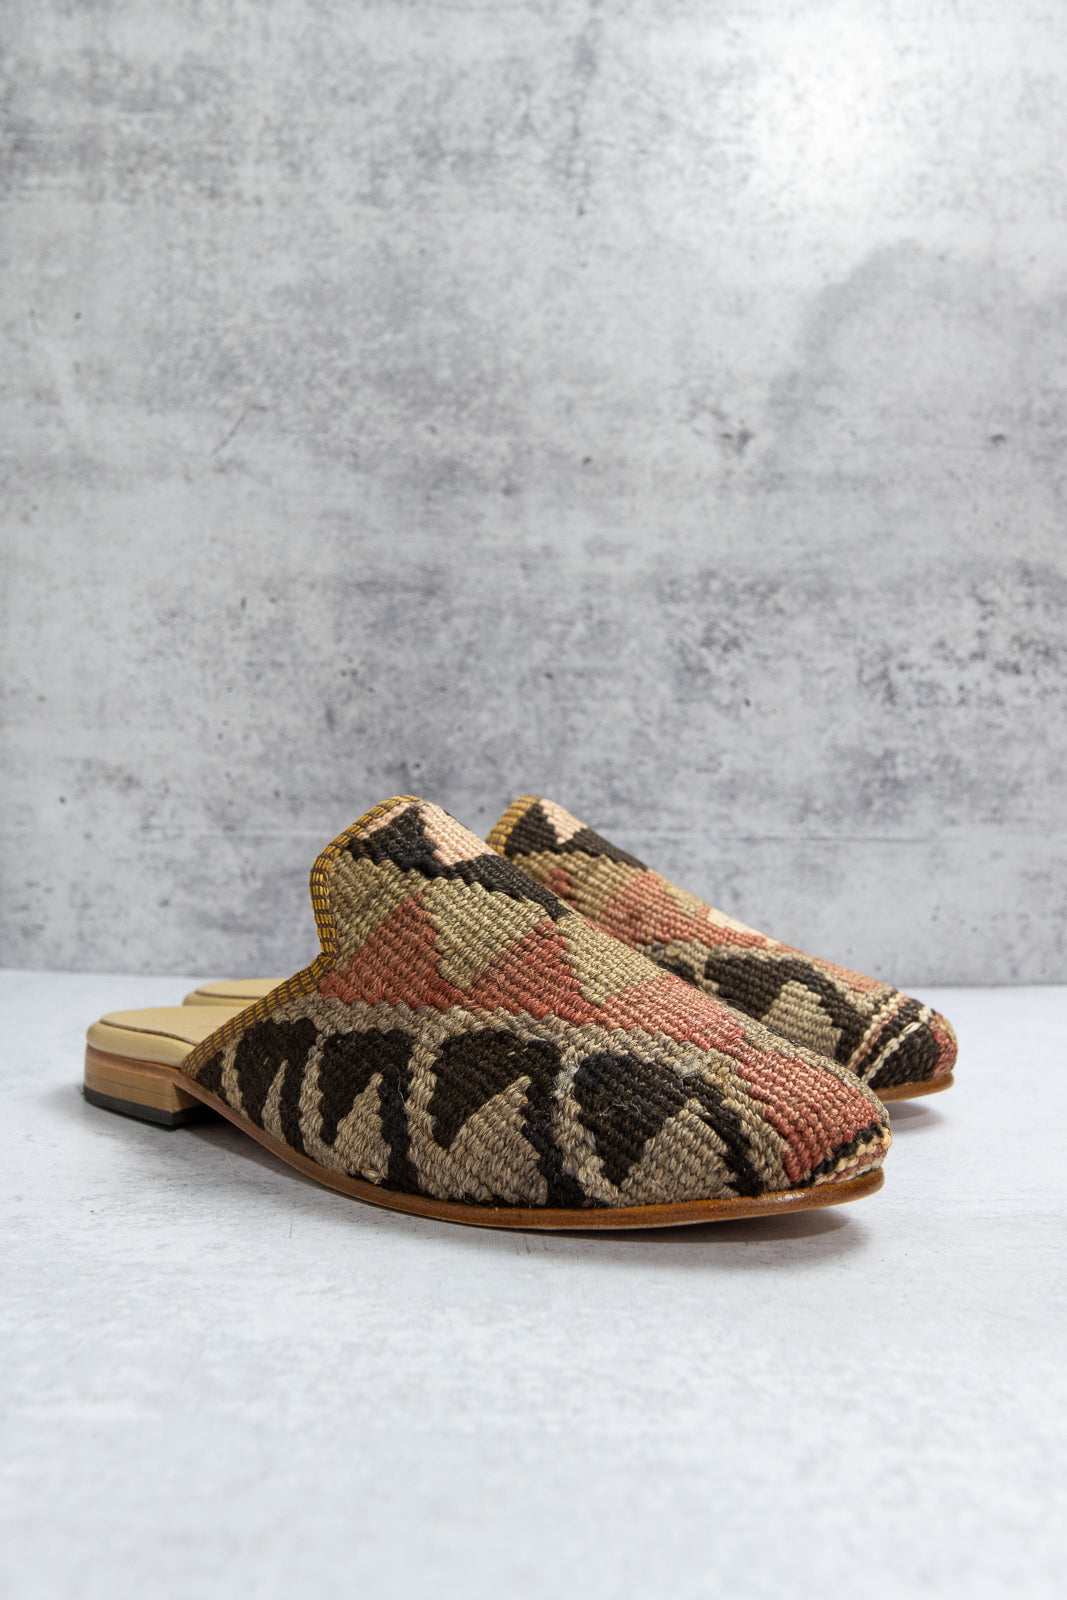 Kilim Mules for Women and Men - Genuine Leather Shoes – minimalchaos